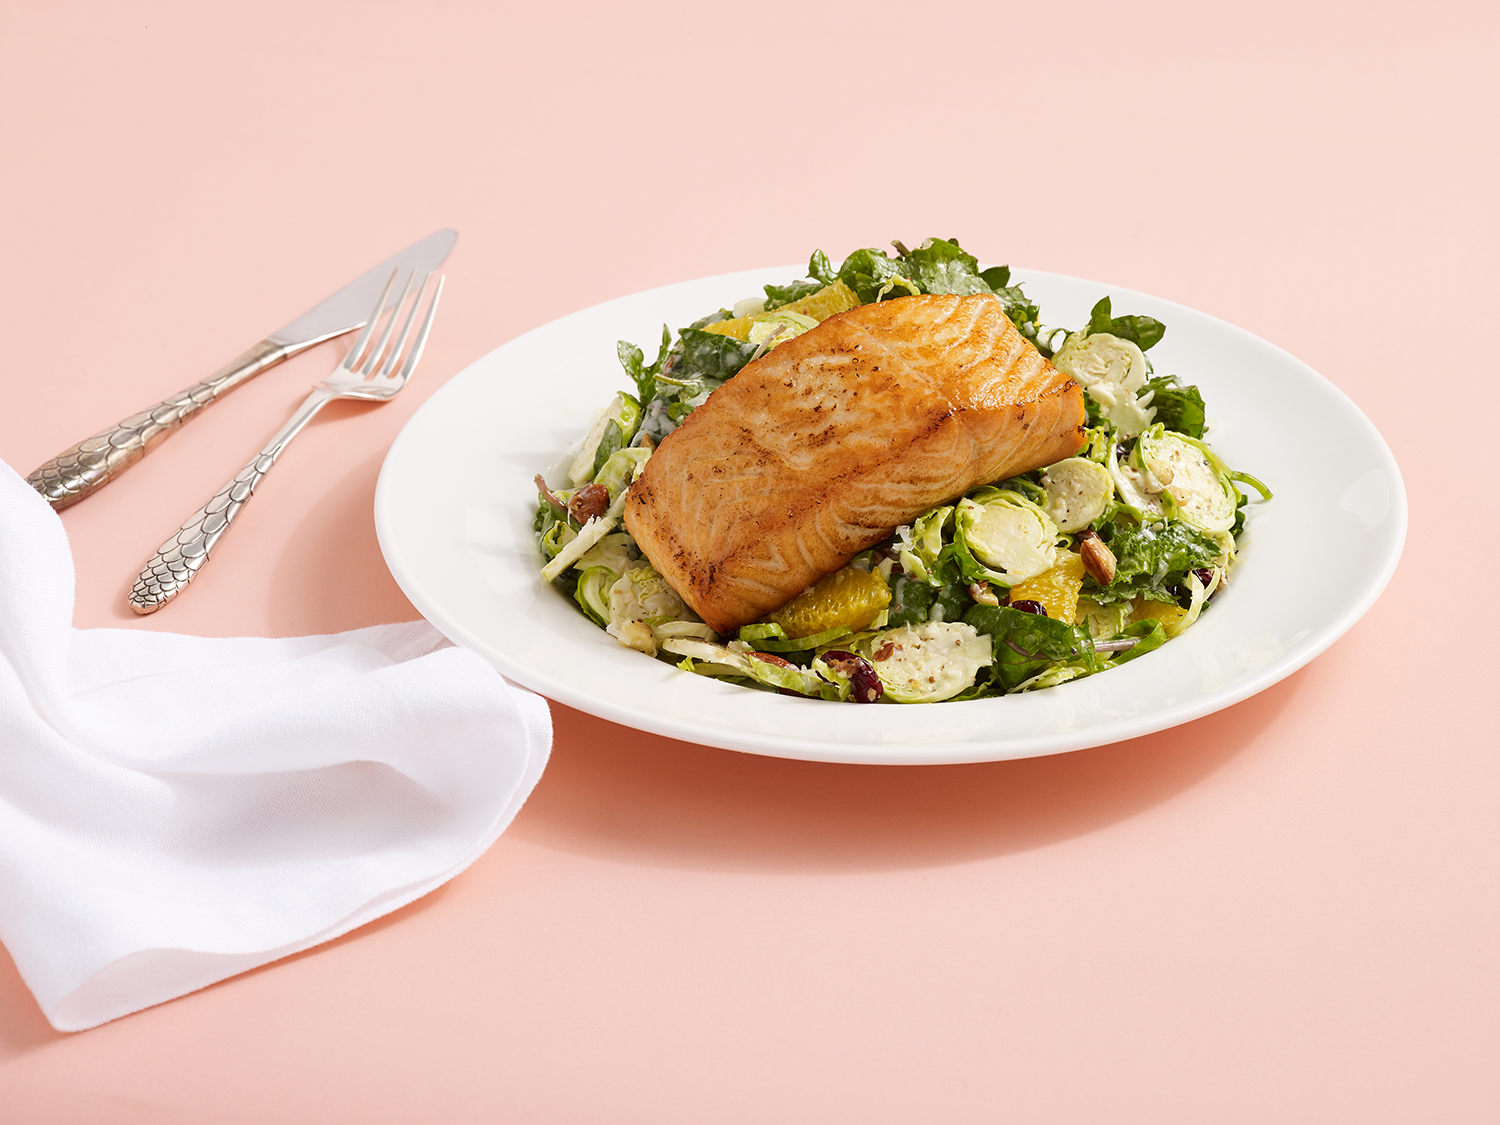 Kale & Brussels Sprout Salad with Salmon Del Frisco's Grille New York (212)786-0760